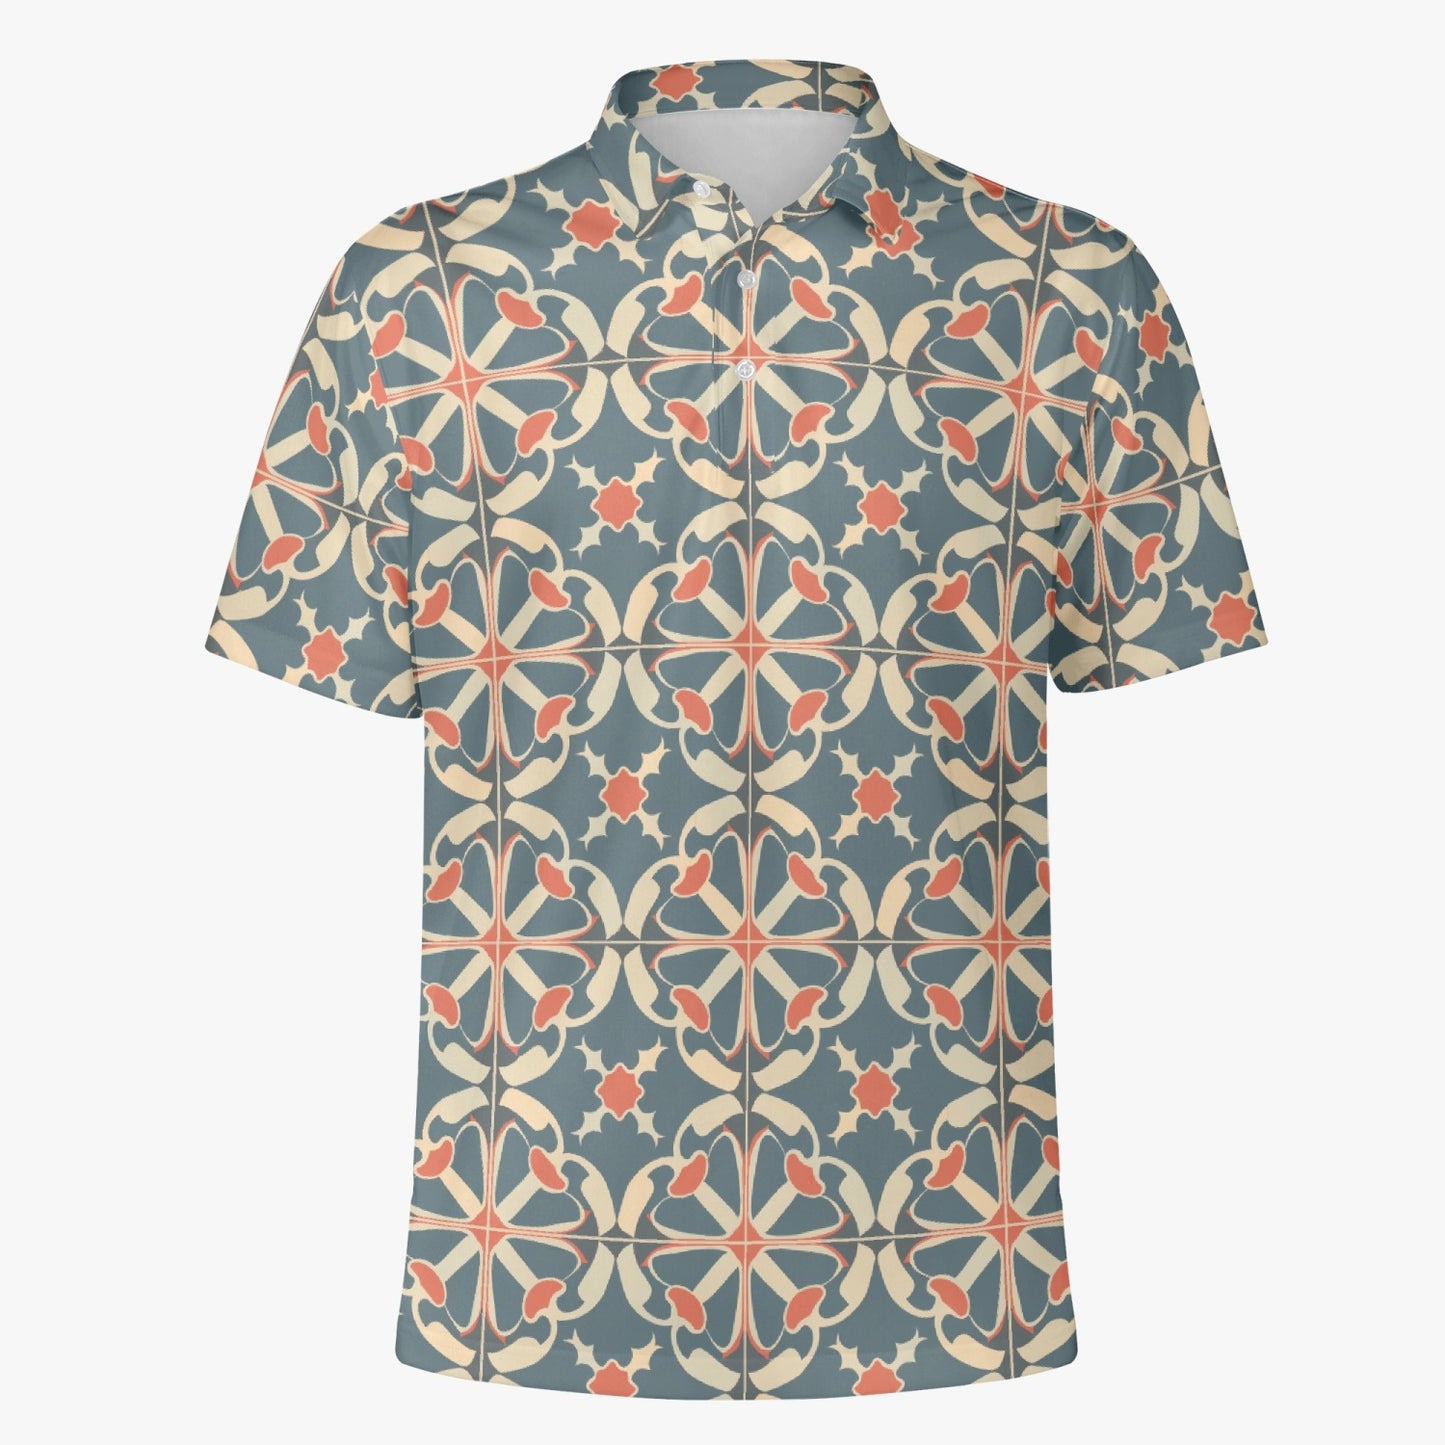 Inspired by Minton Polo Shirt